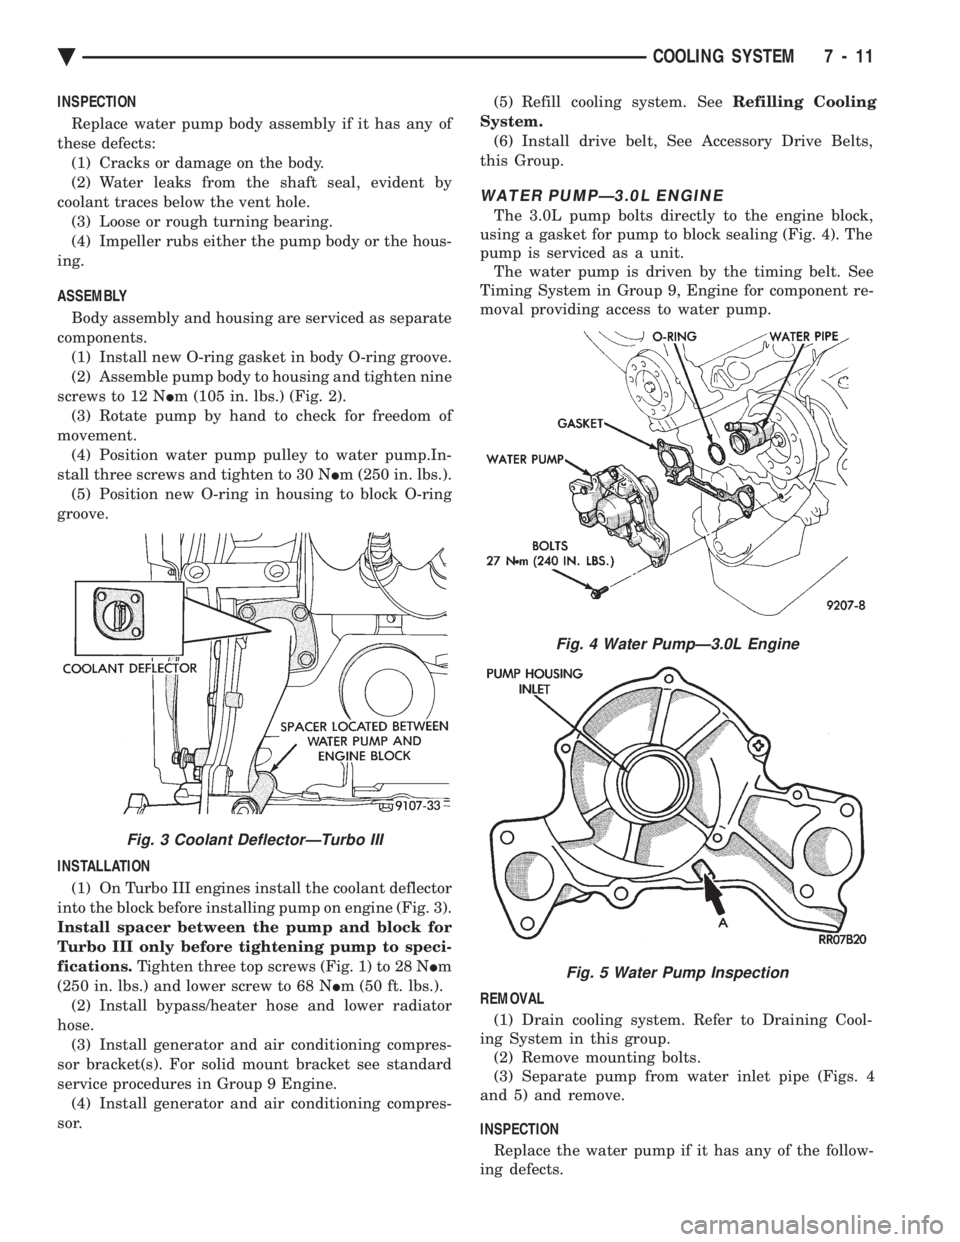 CHEVROLET DYNASTY 1993  Service Manual INSPECTION Replace water pump body assembly if it has any of 
these defects: (1) Cracks or damage on the body.
(2) Water leaks from the shaft seal, evident by
coolant traces below the vent hole. (3) L